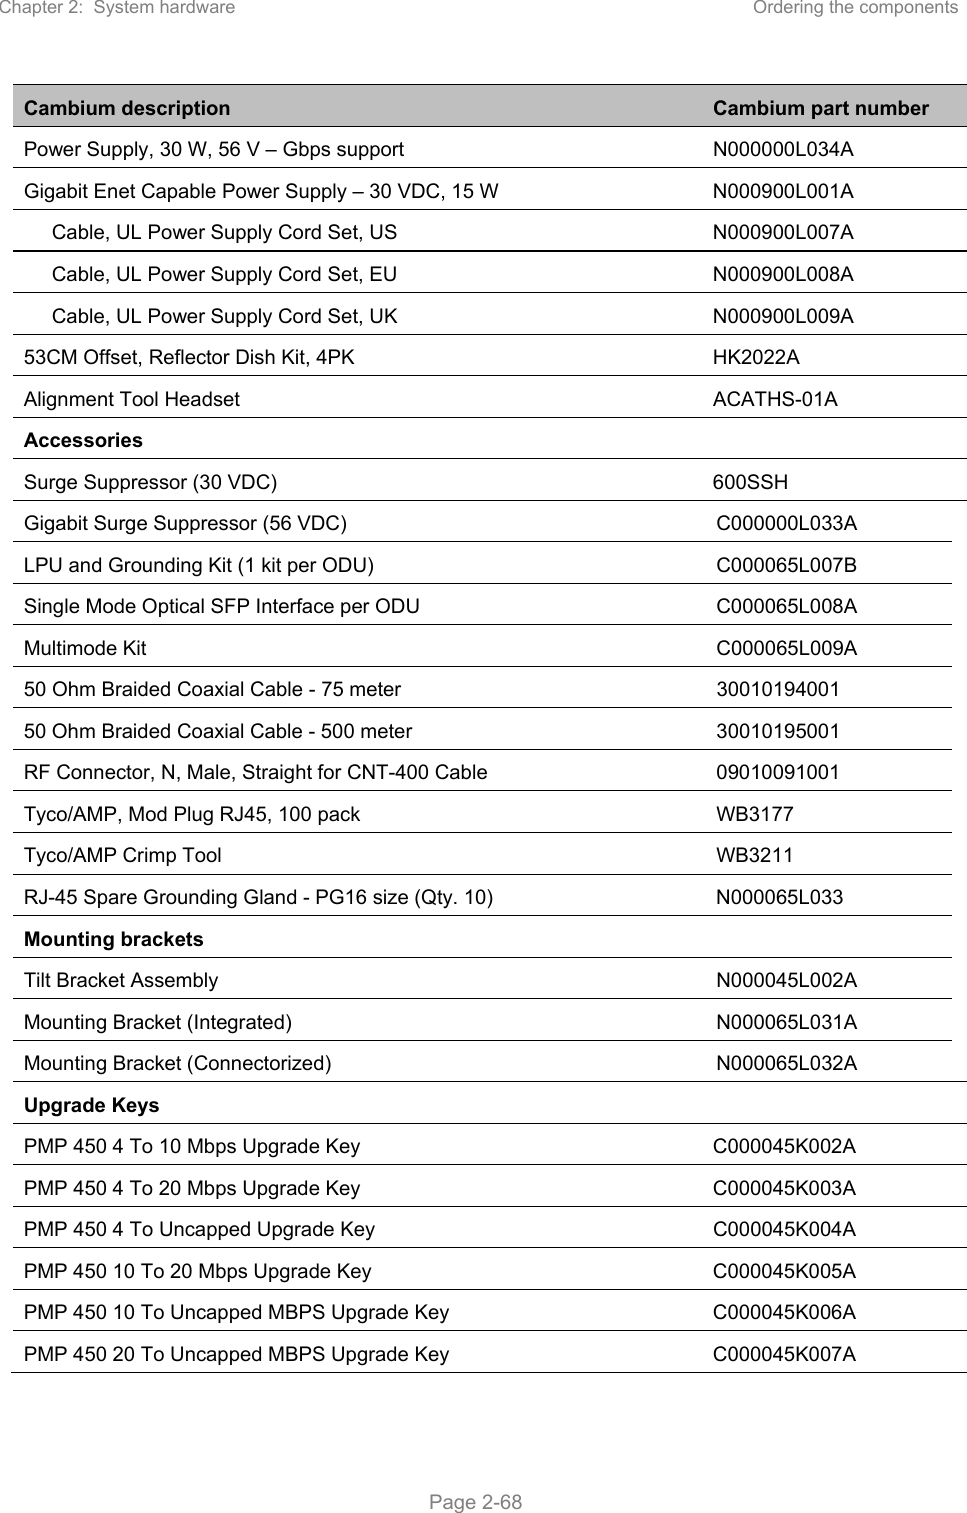 Chapter 2:  System hardware  Ordering the components   Page 2-68 Cambium description  Cambium part number Power Supply, 30 W, 56 V – Gbps support N000000L034A Gigabit Enet Capable Power Supply – 30 VDC, 15 W  N000900L001A      Cable, UL Power Supply Cord Set, US  N000900L007A      Cable, UL Power Supply Cord Set, EU  N000900L008A      Cable, UL Power Supply Cord Set, UK  N000900L009A 53CM Offset, Reflector Dish Kit, 4PK  HK2022A Alignment Tool Headset  ACATHS-01A Accessories   Surge Suppressor (30 VDC)  600SSH Gigabit Surge Suppressor (56 VDC)  C000000L033A LPU and Grounding Kit (1 kit per ODU)  C000065L007B Single Mode Optical SFP Interface per ODU  C000065L008A Multimode Kit  C000065L009A 50 Ohm Braided Coaxial Cable - 75 meter   30010194001  50 Ohm Braided Coaxial Cable - 500 meter   30010195001  RF Connector, N, Male, Straight for CNT-400 Cable  09010091001  Tyco/AMP, Mod Plug RJ45, 100 pack  WB3177 Tyco/AMP Crimp Tool  WB3211 RJ-45 Spare Grounding Gland - PG16 size (Qty. 10)  N000065L033 Mounting brackets   Tilt Bracket Assembly  N000045L002A Mounting Bracket (Integrated)  N000065L031A Mounting Bracket (Connectorized)  N000065L032A Upgrade Keys   PMP 450 4 To 10 Mbps Upgrade Key  C000045K002A PMP 450 4 To 20 Mbps Upgrade Key  C000045K003A PMP 450 4 To Uncapped Upgrade Key  C000045K004A PMP 450 10 To 20 Mbps Upgrade Key  C000045K005A PMP 450 10 To Uncapped MBPS Upgrade Key  C000045K006A PMP 450 20 To Uncapped MBPS Upgrade Key  C000045K007A 